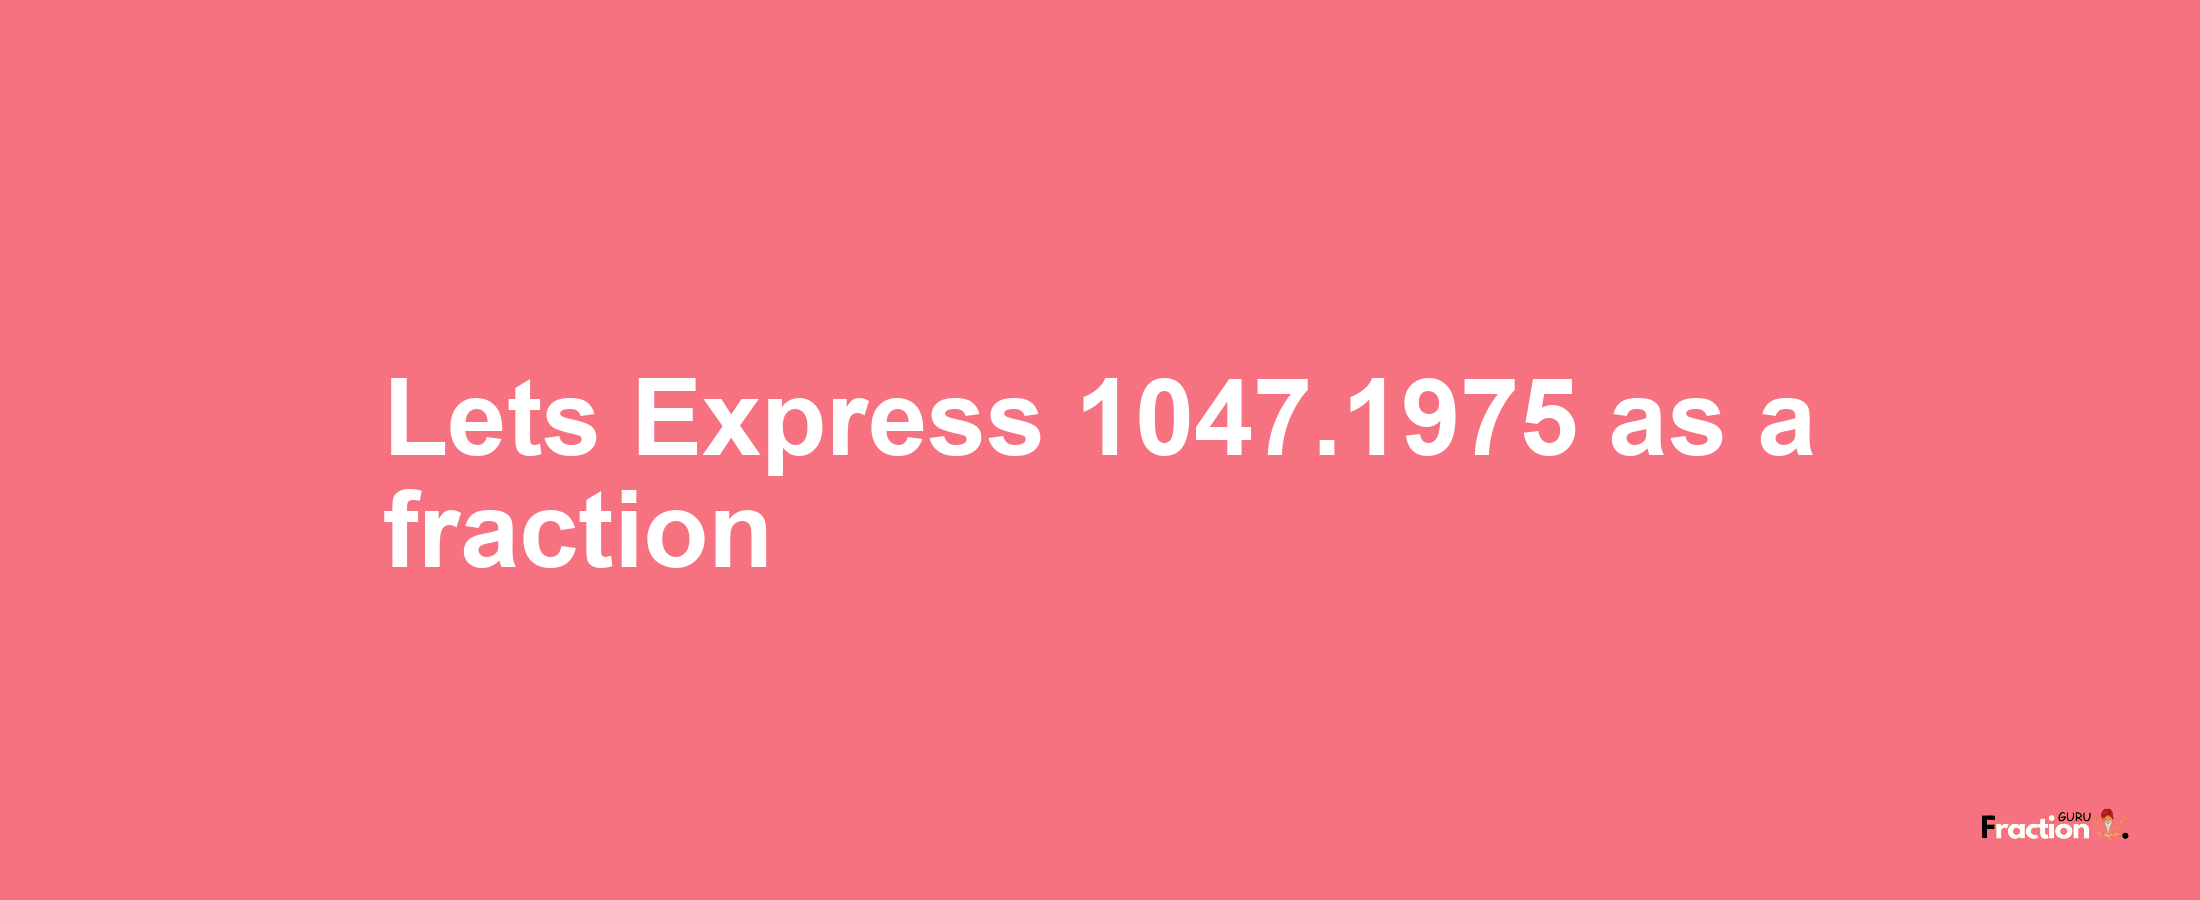 Lets Express 1047.1975 as afraction